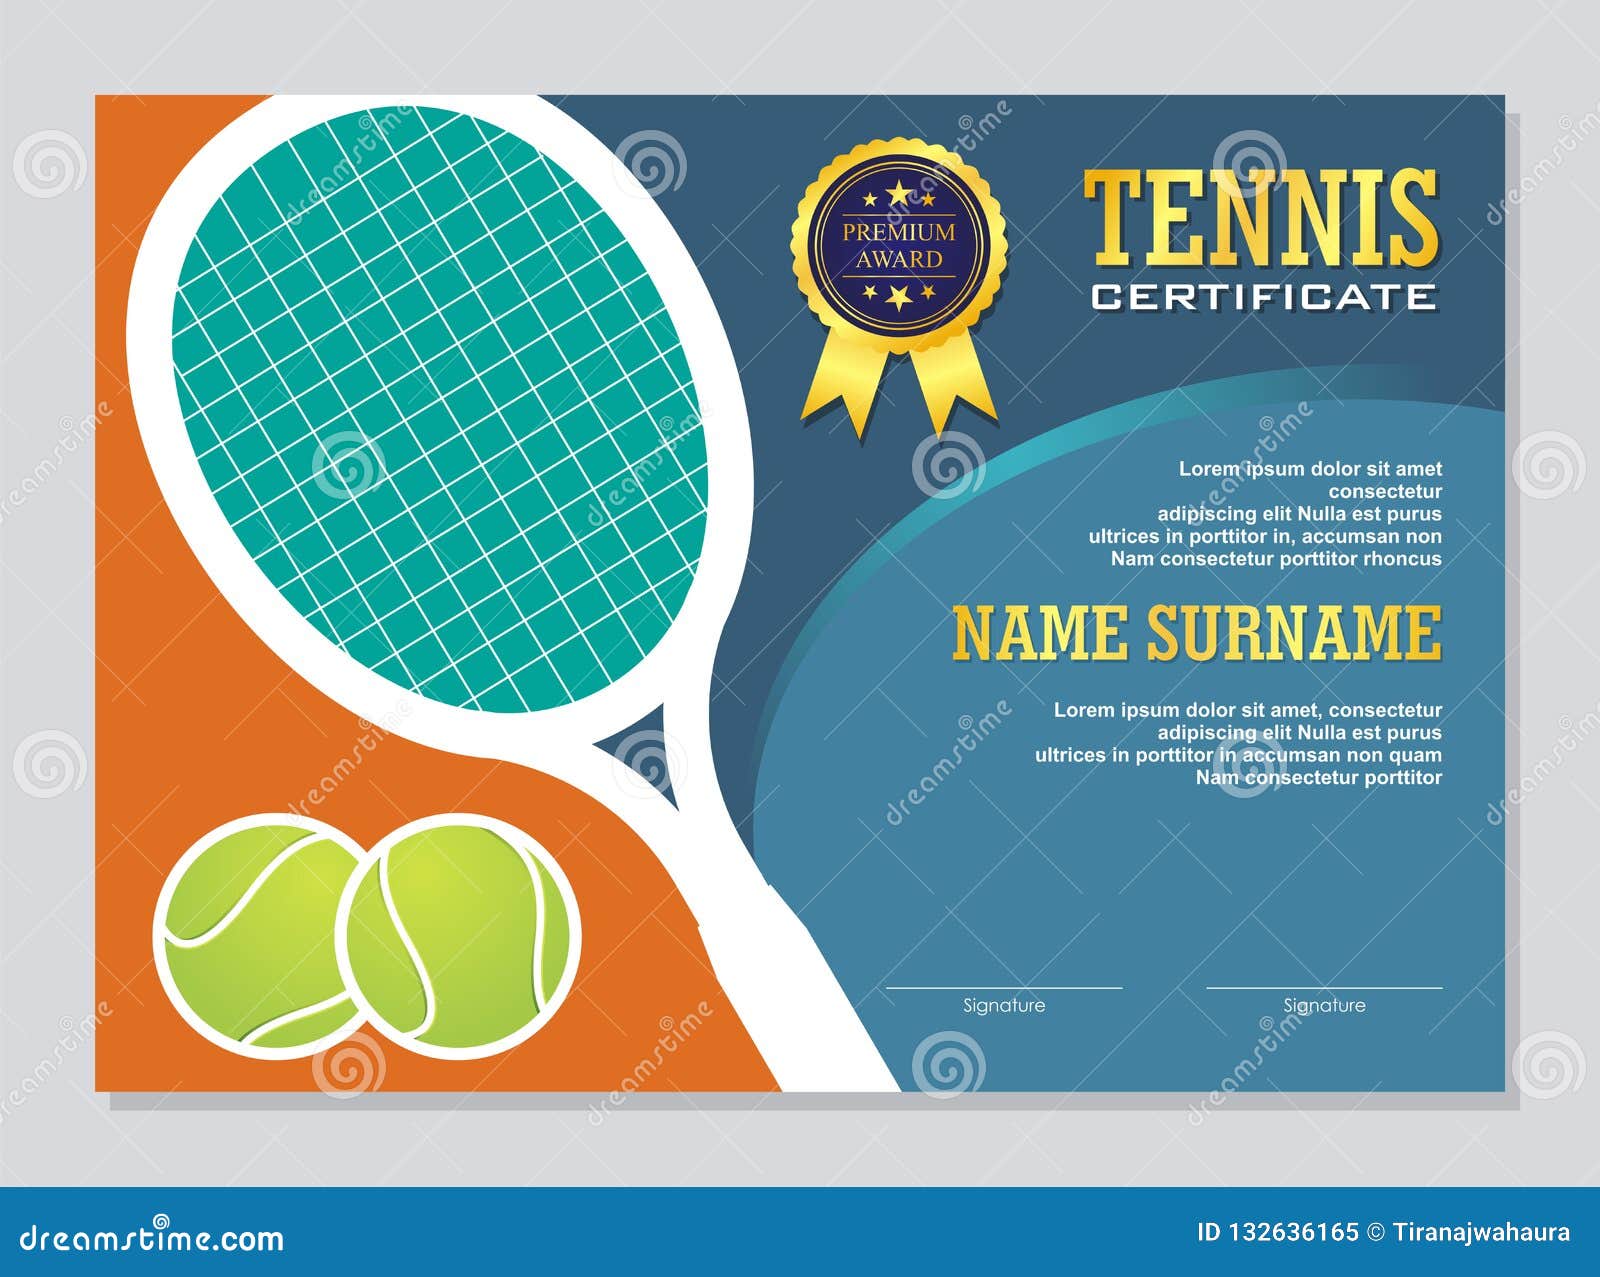 Tennis Certificate - Award Template with Colorful and Stylish Pertaining To Tennis Certificate Template Free